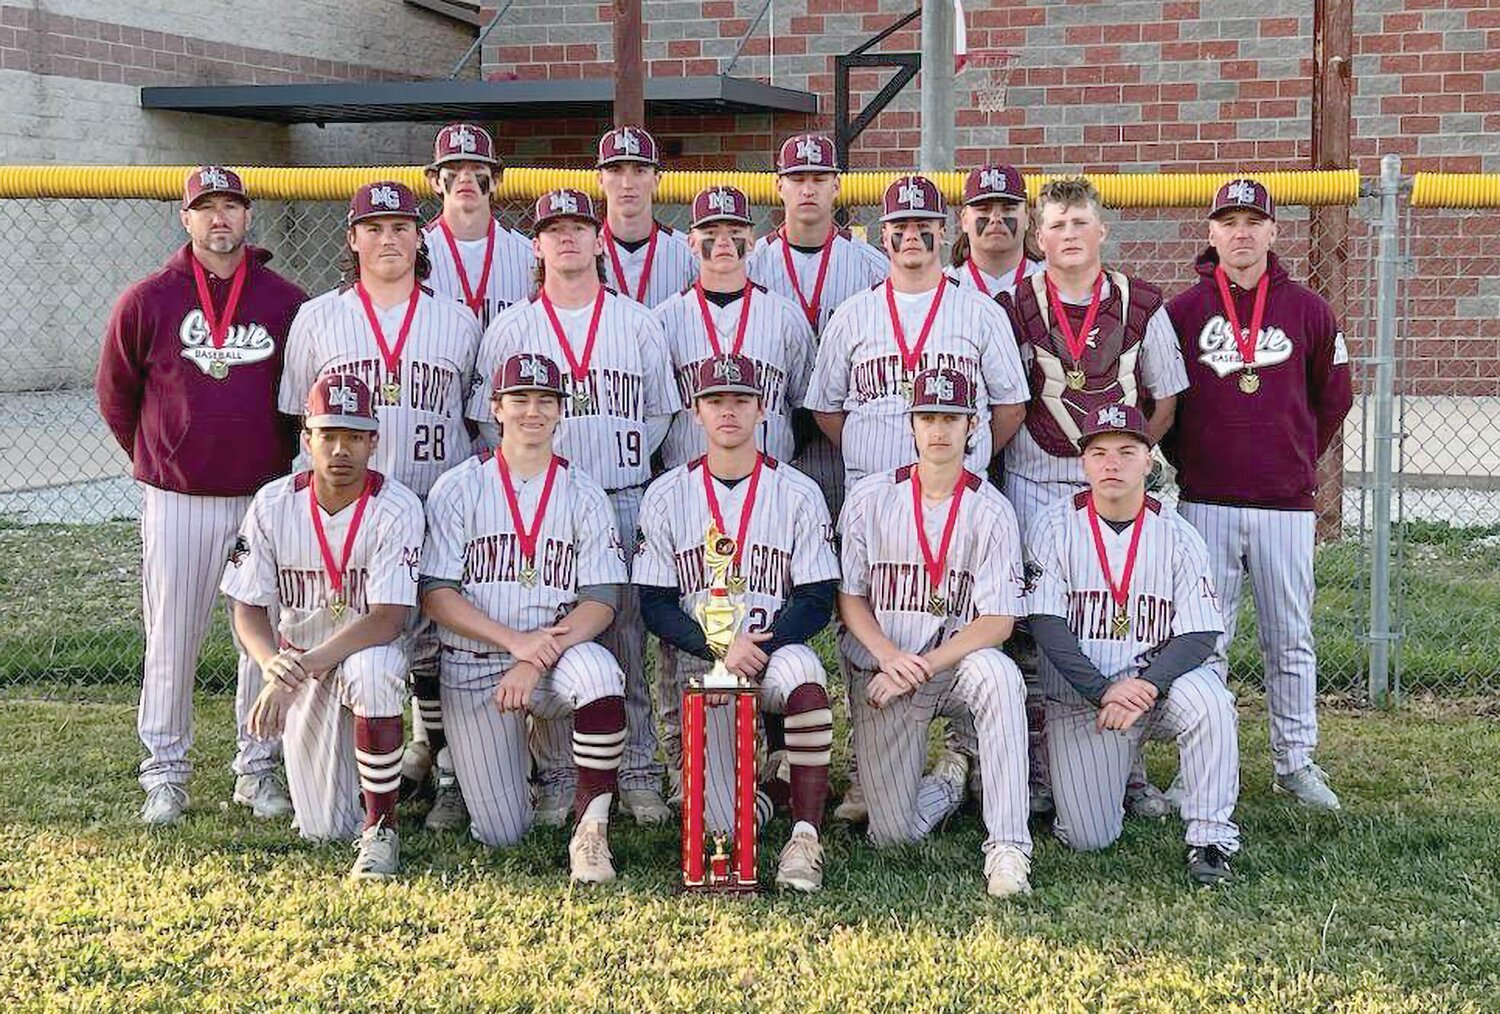 Mountain Grove’s baseball team after winning its second straight Southern Invitational title. The Panthers beat Van Buren in the finals and have won six straight games.